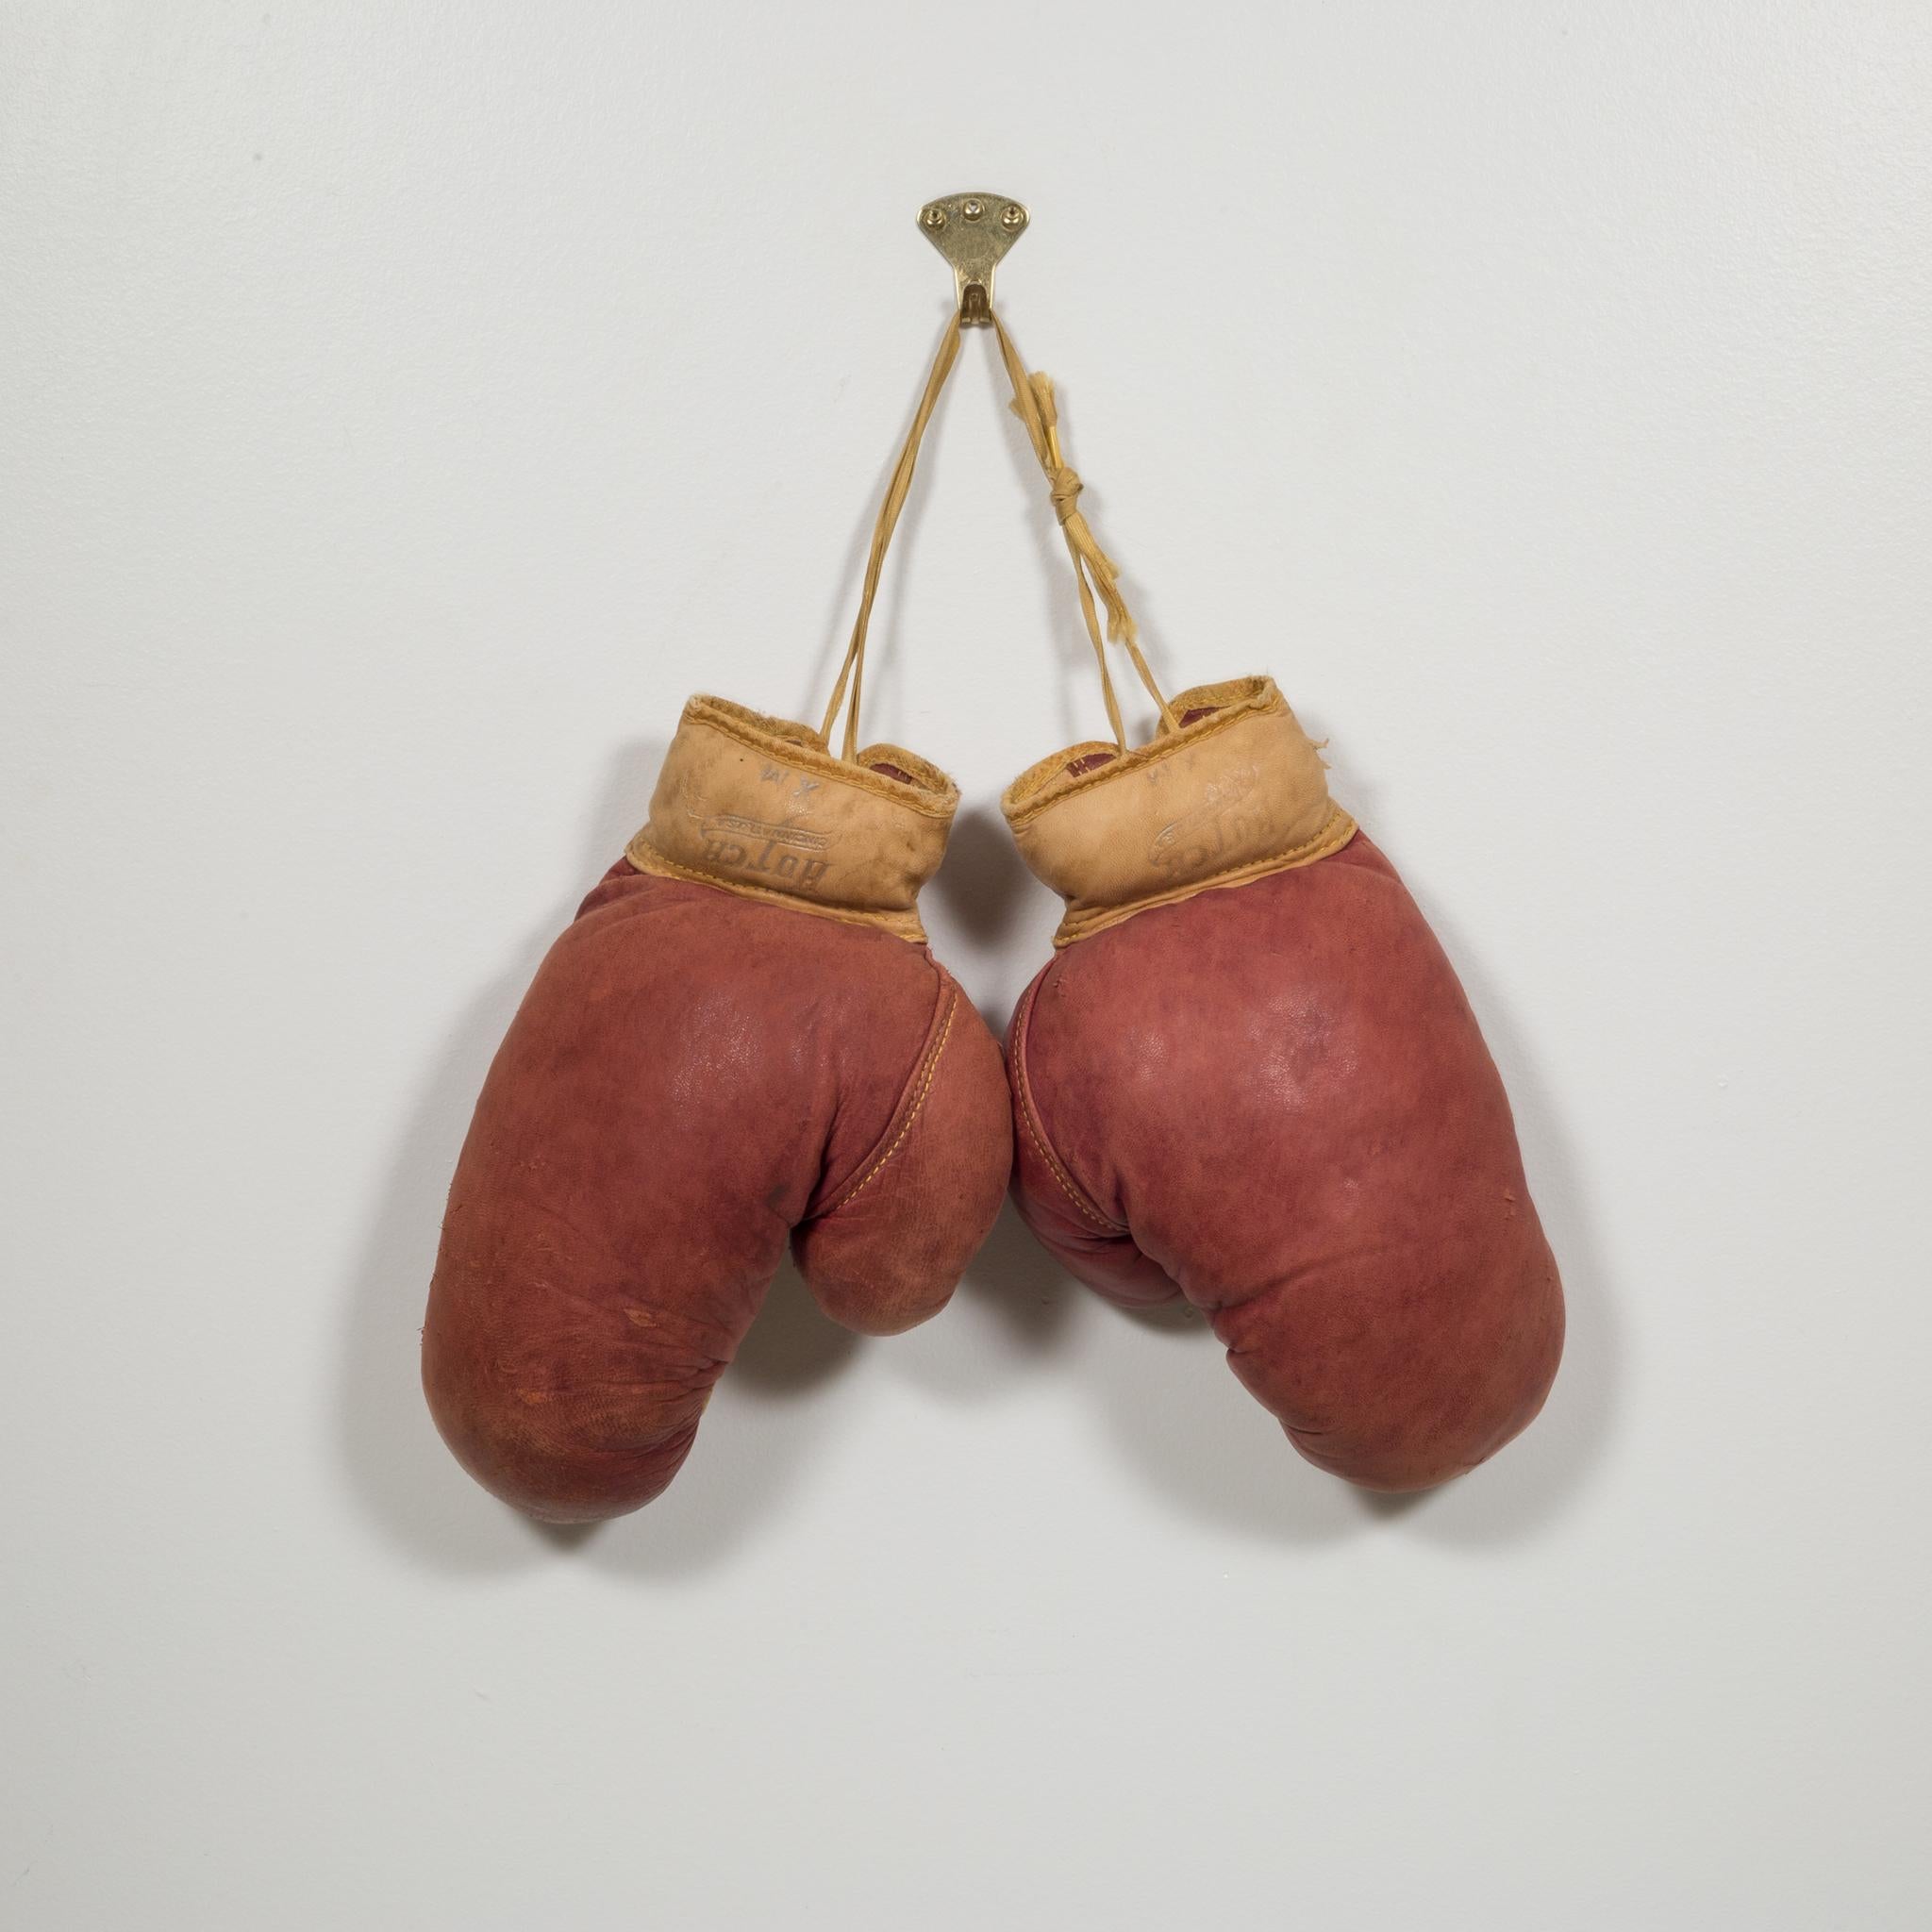 This is a original pair of vintage boxing gloves. The gloves are a maroon leather and light brown leather on the palm with light brown laces. The are both stamped 